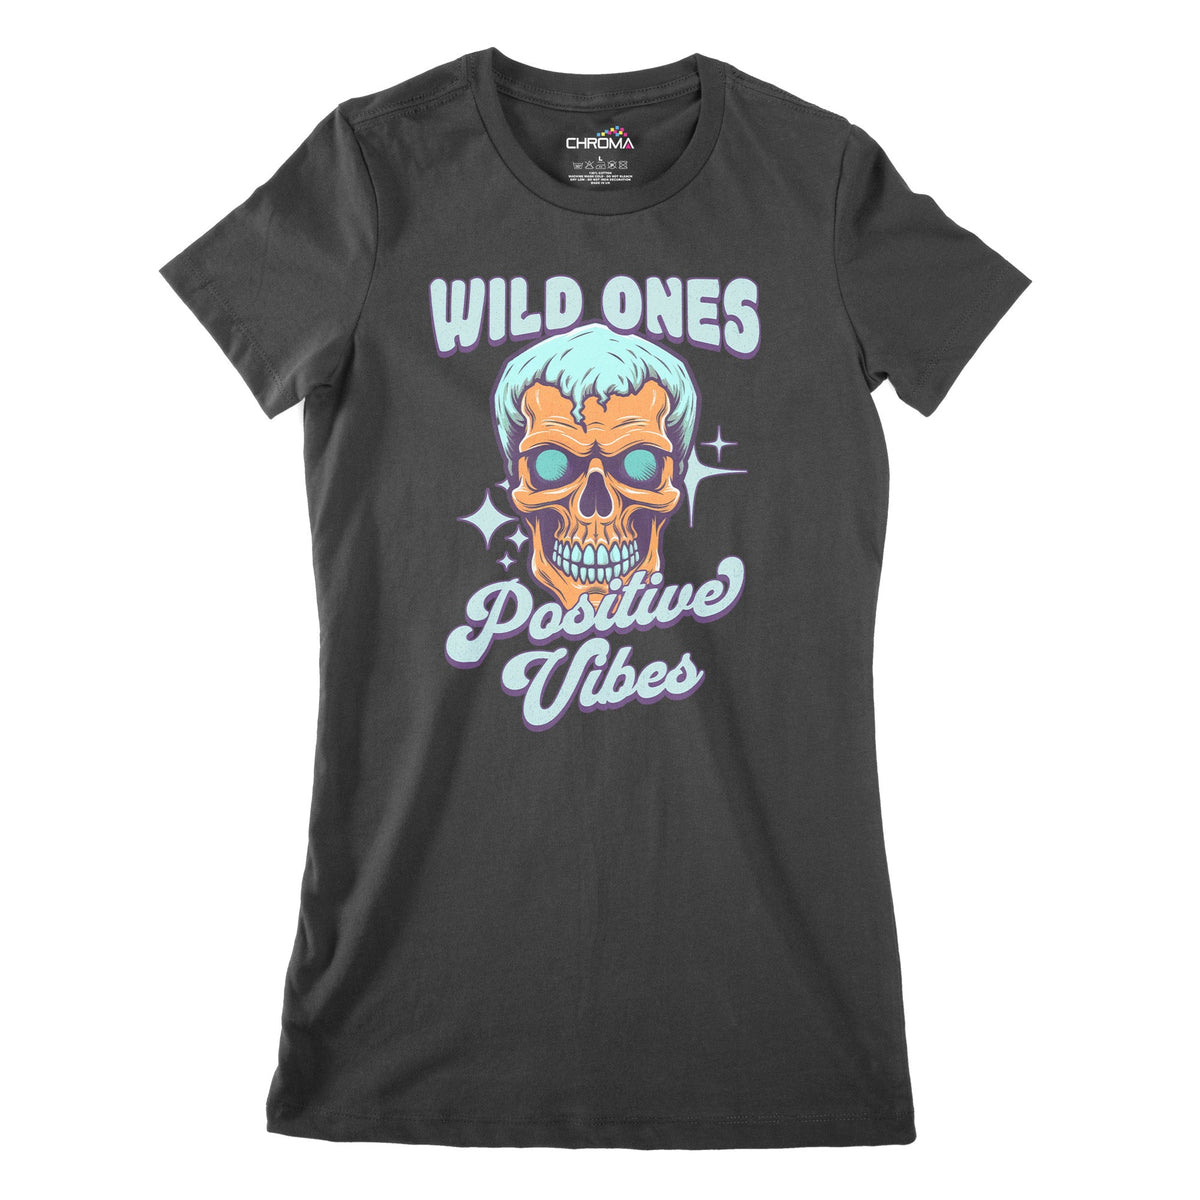 Wild Ones Positive Vibes Women's Classic Fitted T-Shirt Chroma Clothing